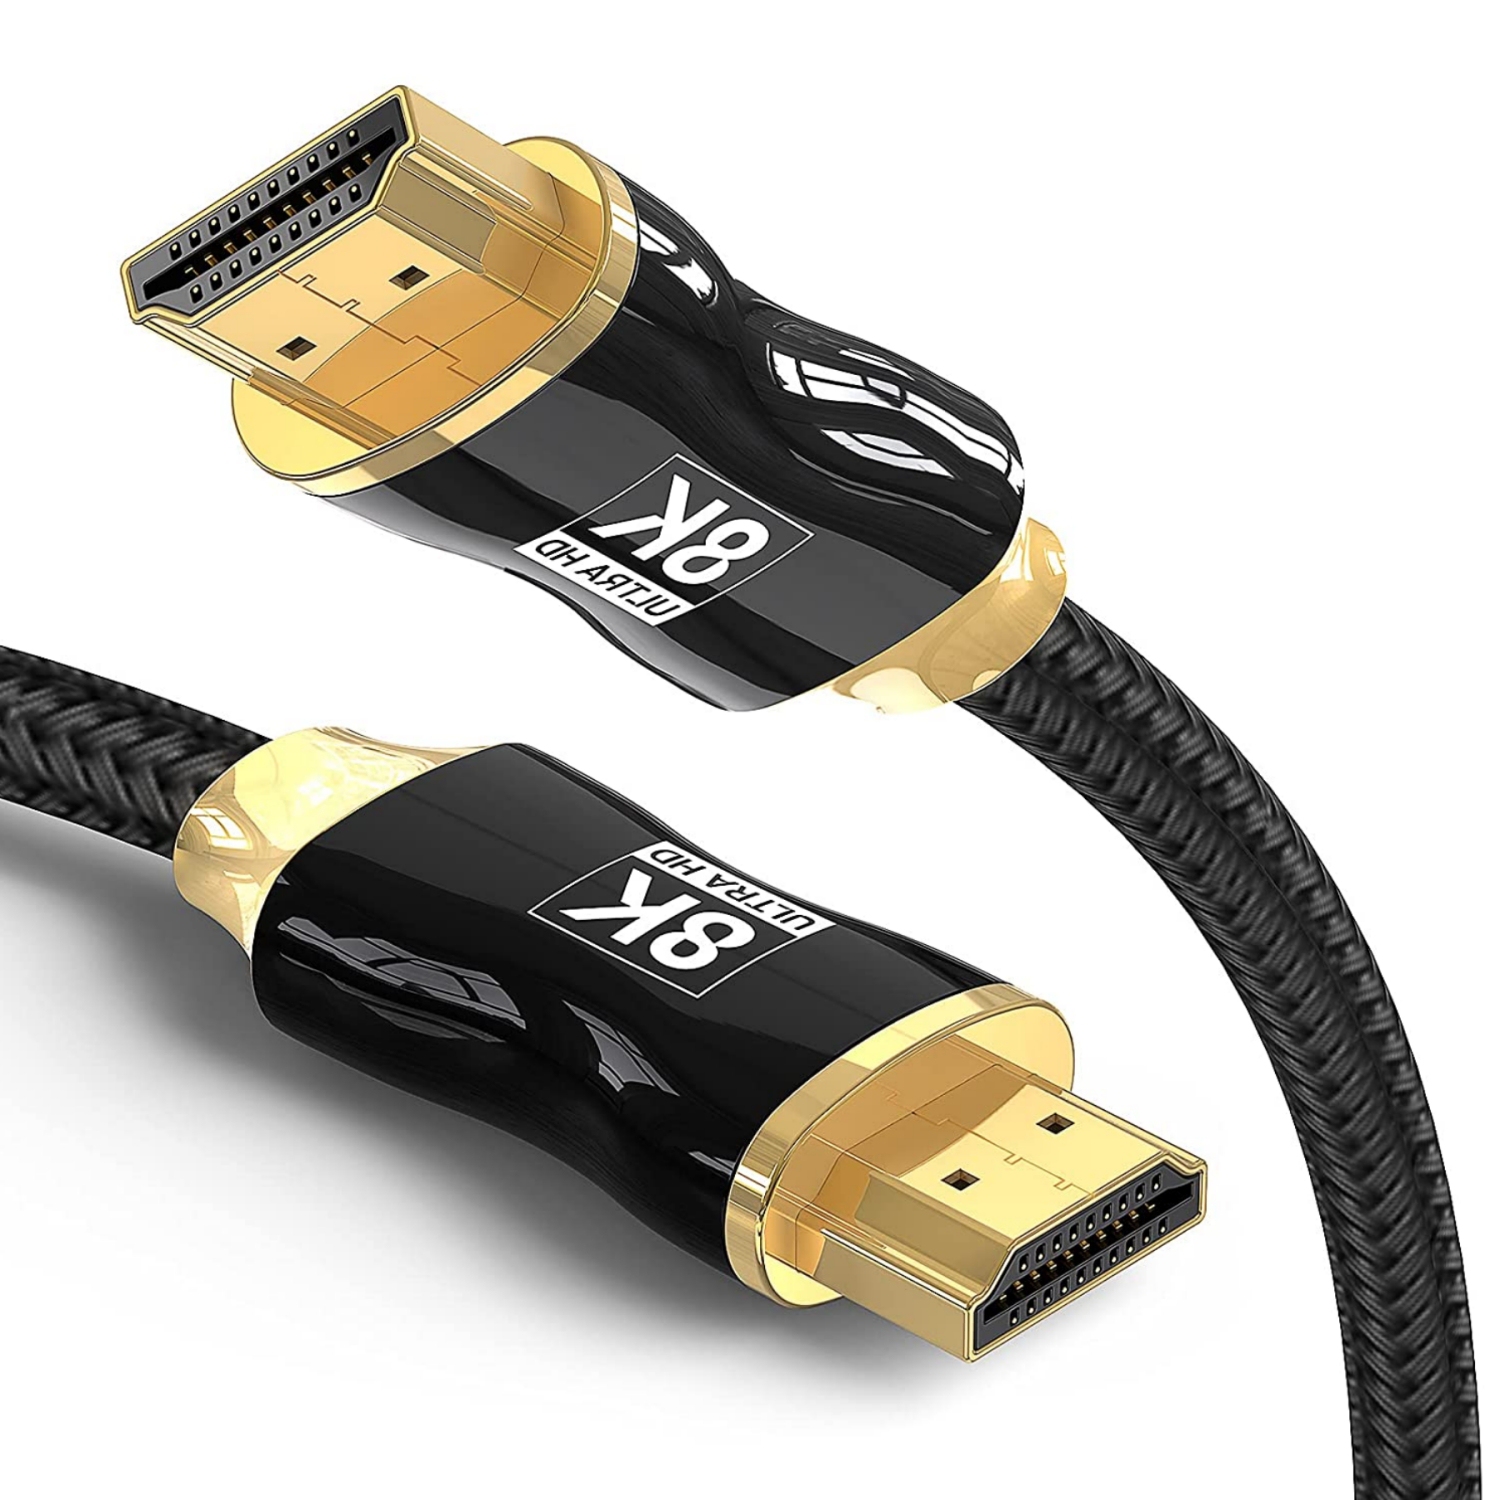 NIERBO 8K HDMI 2.1 Cable 3.3Ft, Supports 48Gbps 8K@60Hz 4K@120Hz eARC HDCP2.2 2.3 Compatible with Apple Sony LG Samsung TV, PS5, PS4, One Series X, Xbox (Zinc Alloy housing)